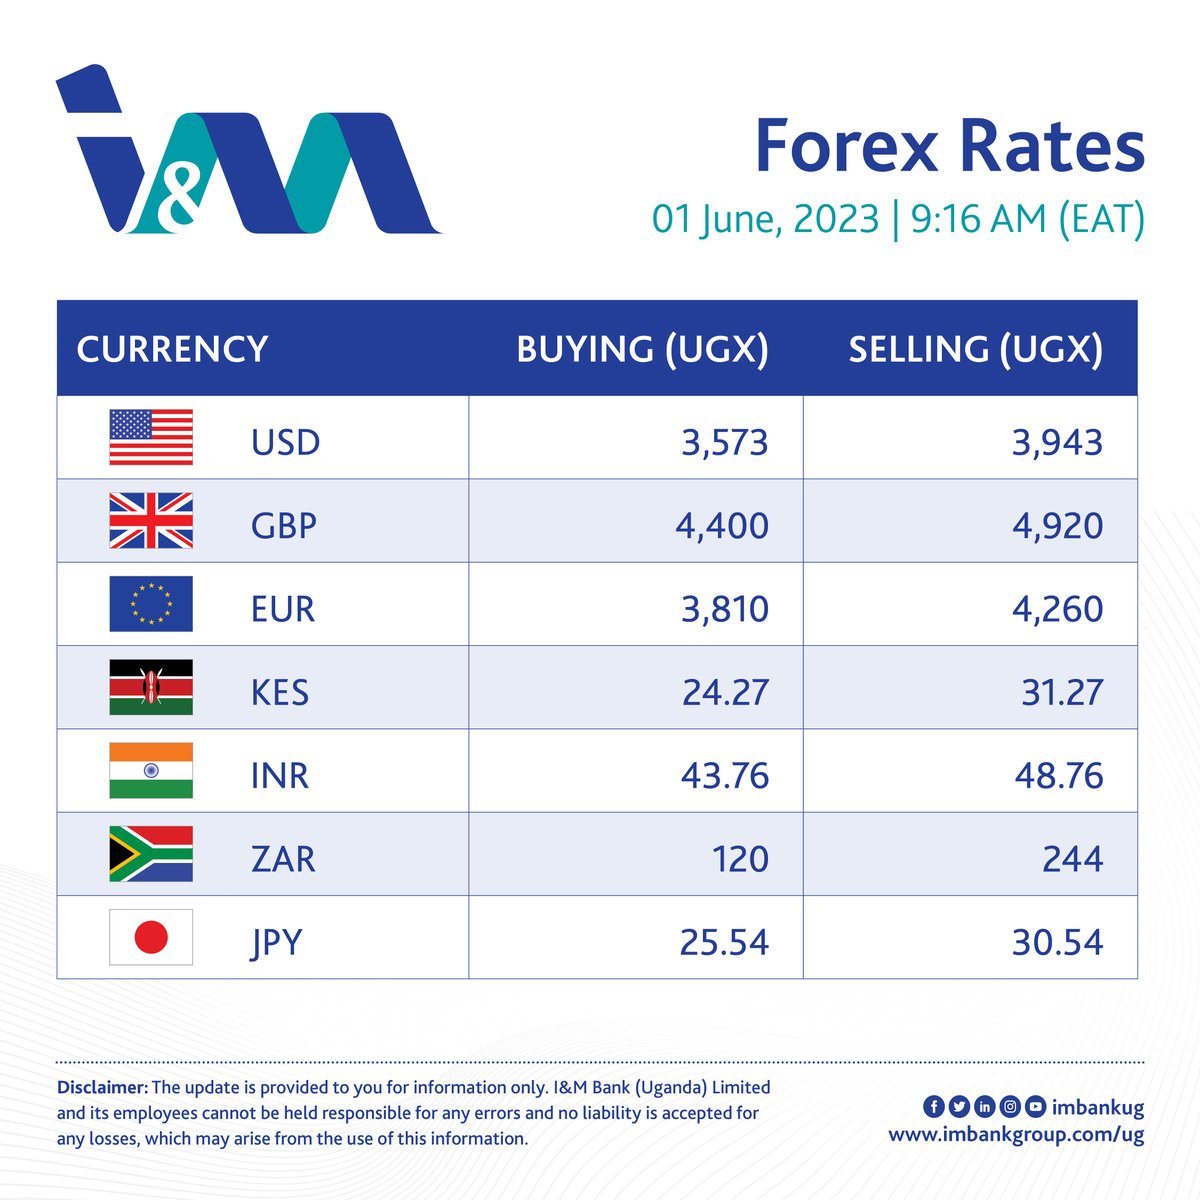 Our competitive rates will keep you ahead in the forex trading world! You can trust us to provide the best deals every step of the way so you can trade with confidence.  #WeAreOnYourSide

Visit ow.ly/rPXc50OBtP3 to view our current rates.